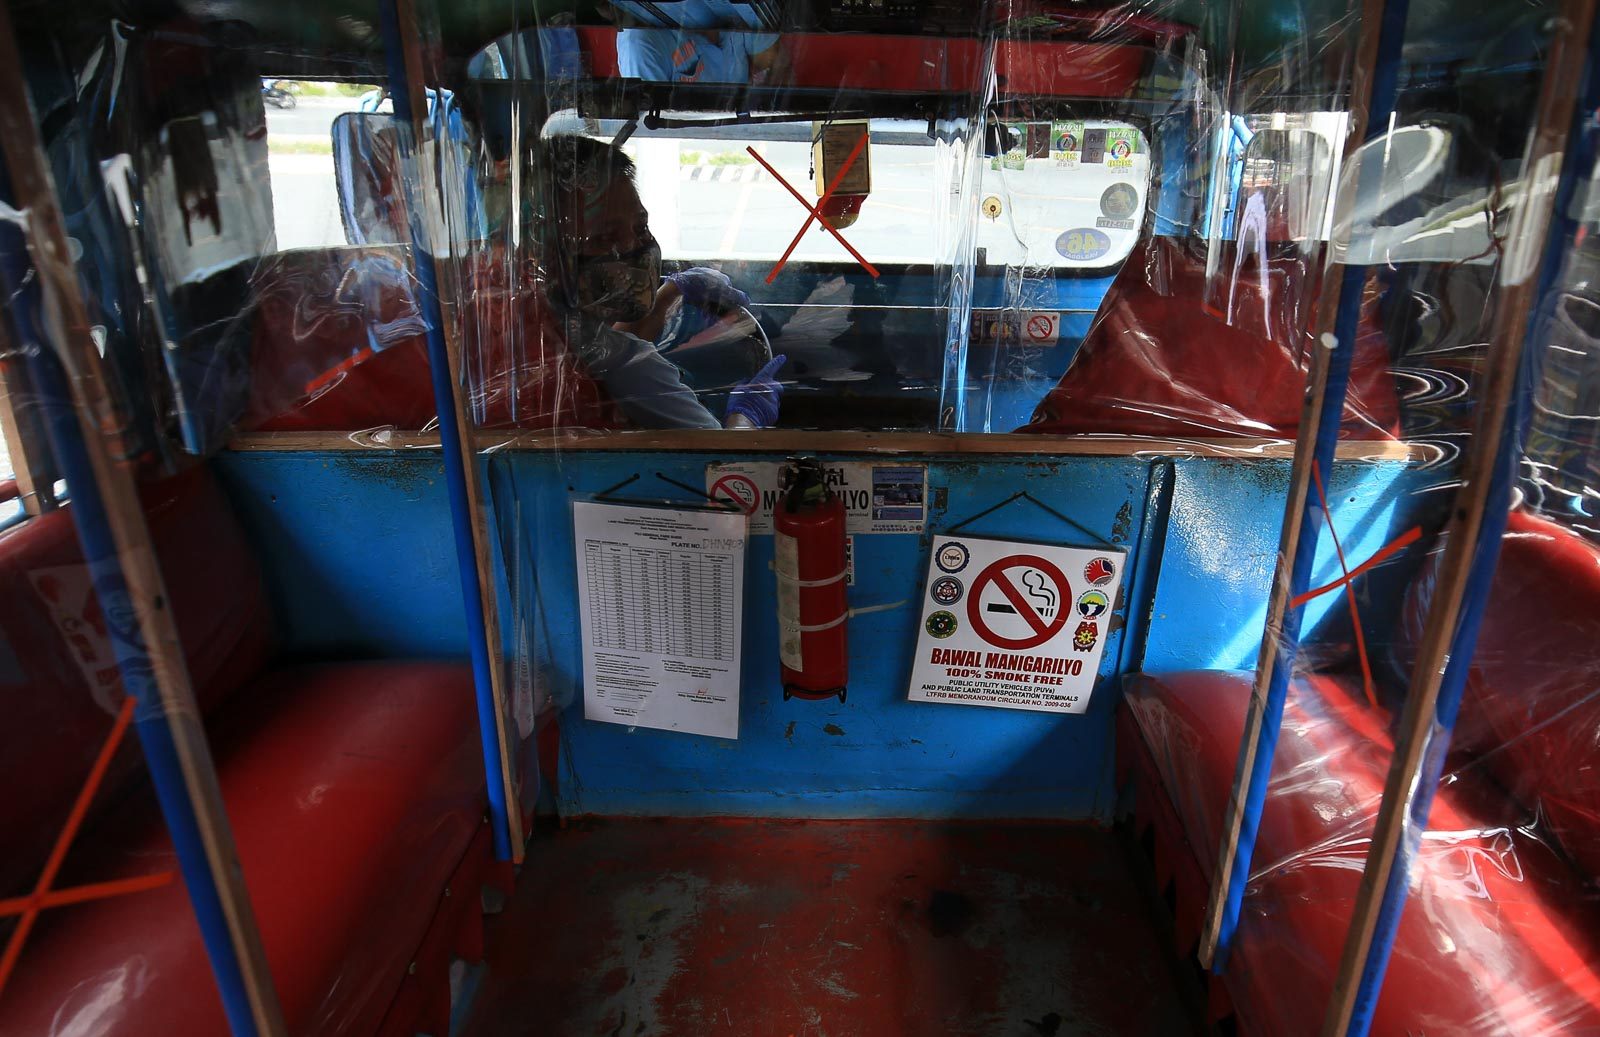 RESUME OPERATIONS. Foot bath, face mask and plastic covers, these are what jeepney drivers are preparing at their terminal in Pasay City. Photo by Inoue Jaena/Rappler 